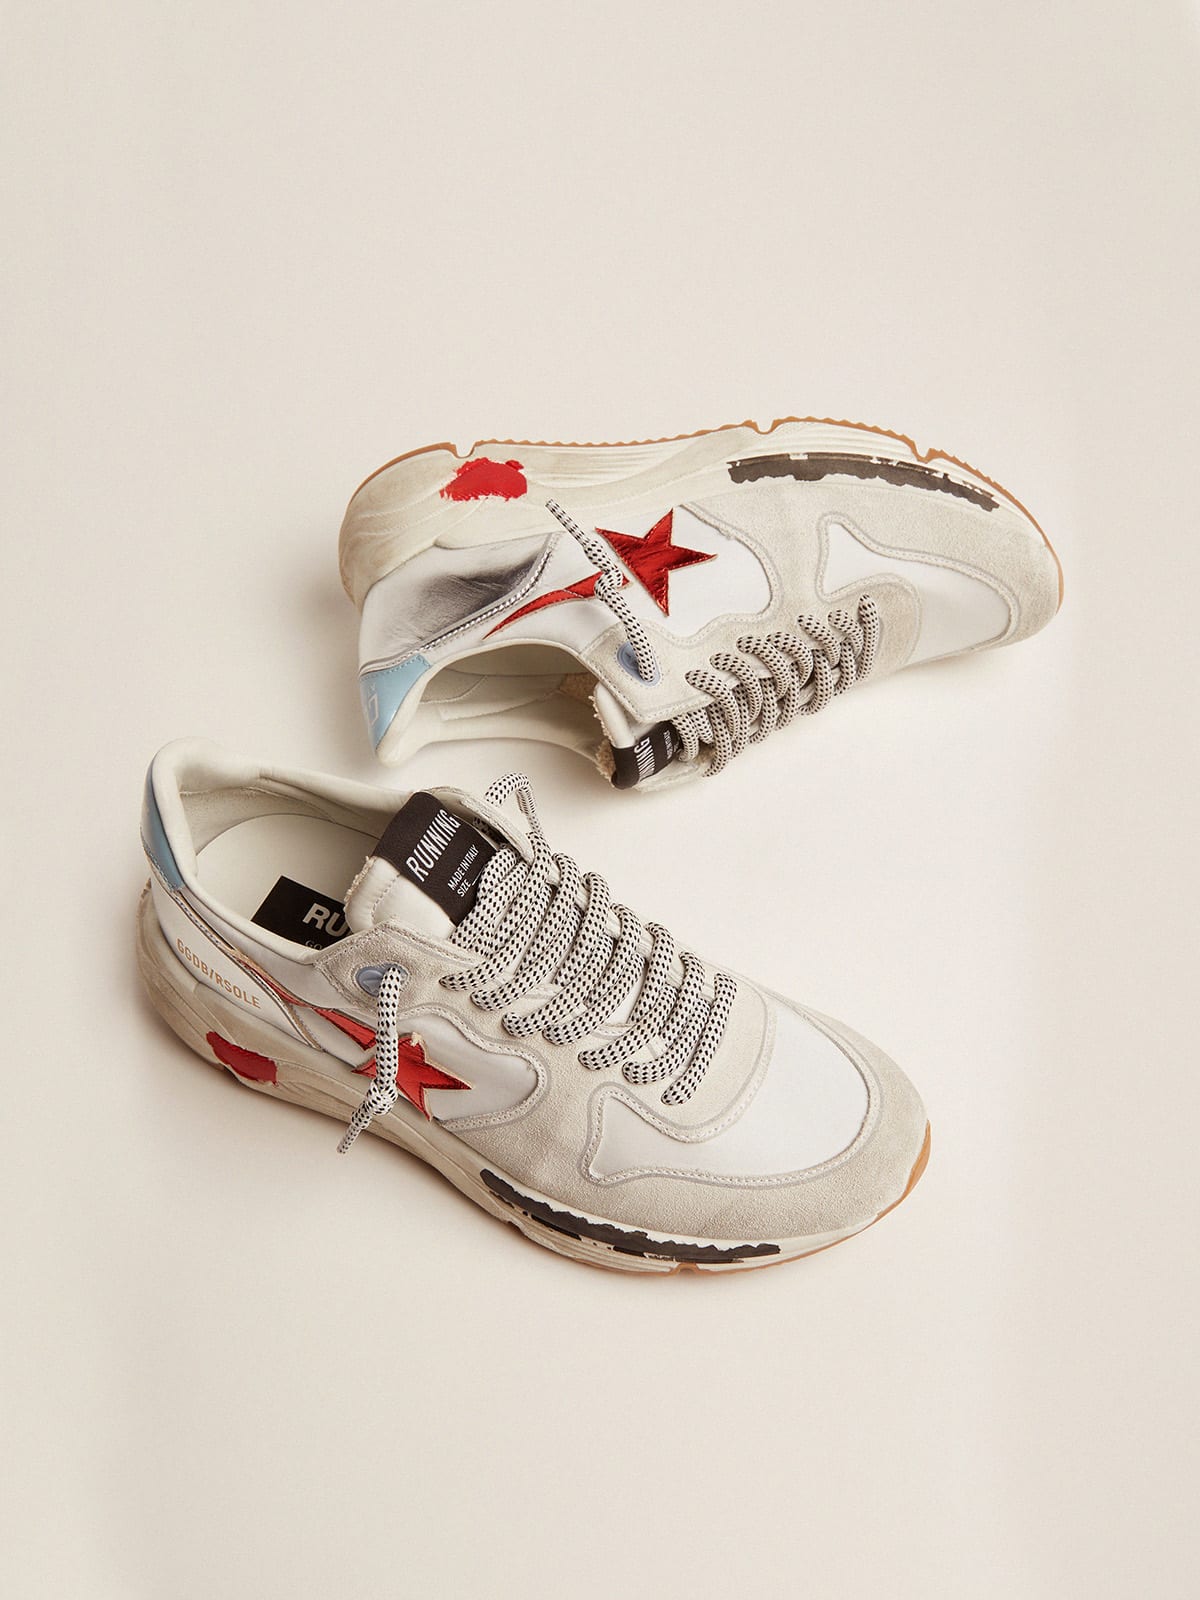 Running Sole sneakers in nylon and suede with red laminated leather star |  Golden Goose